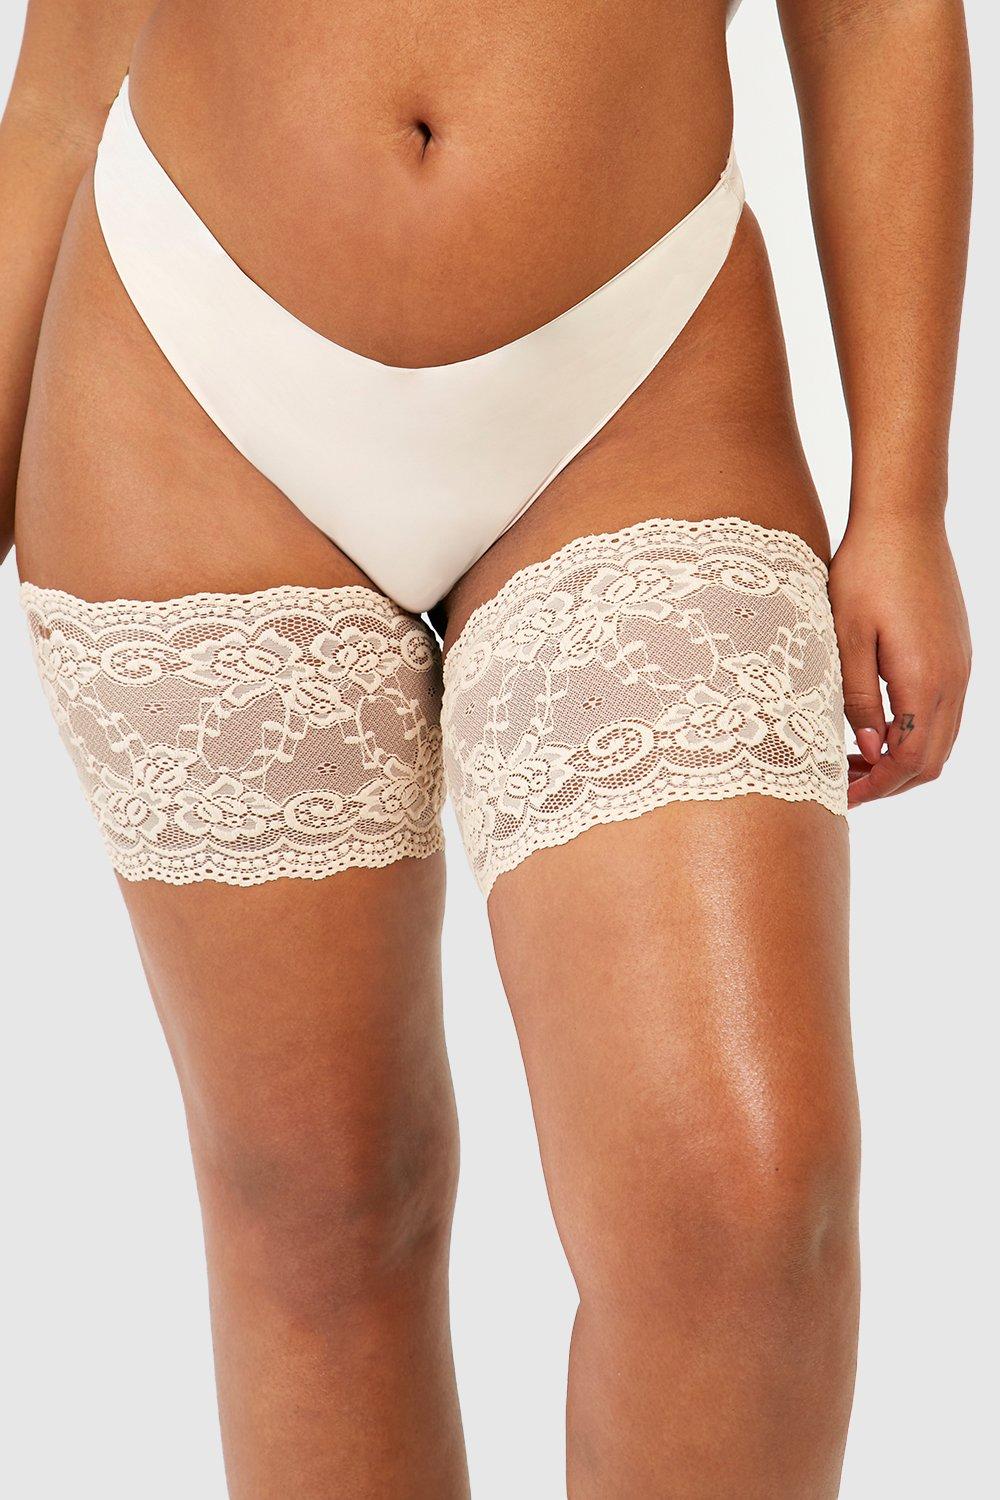 Plus Lace Chafing Bands